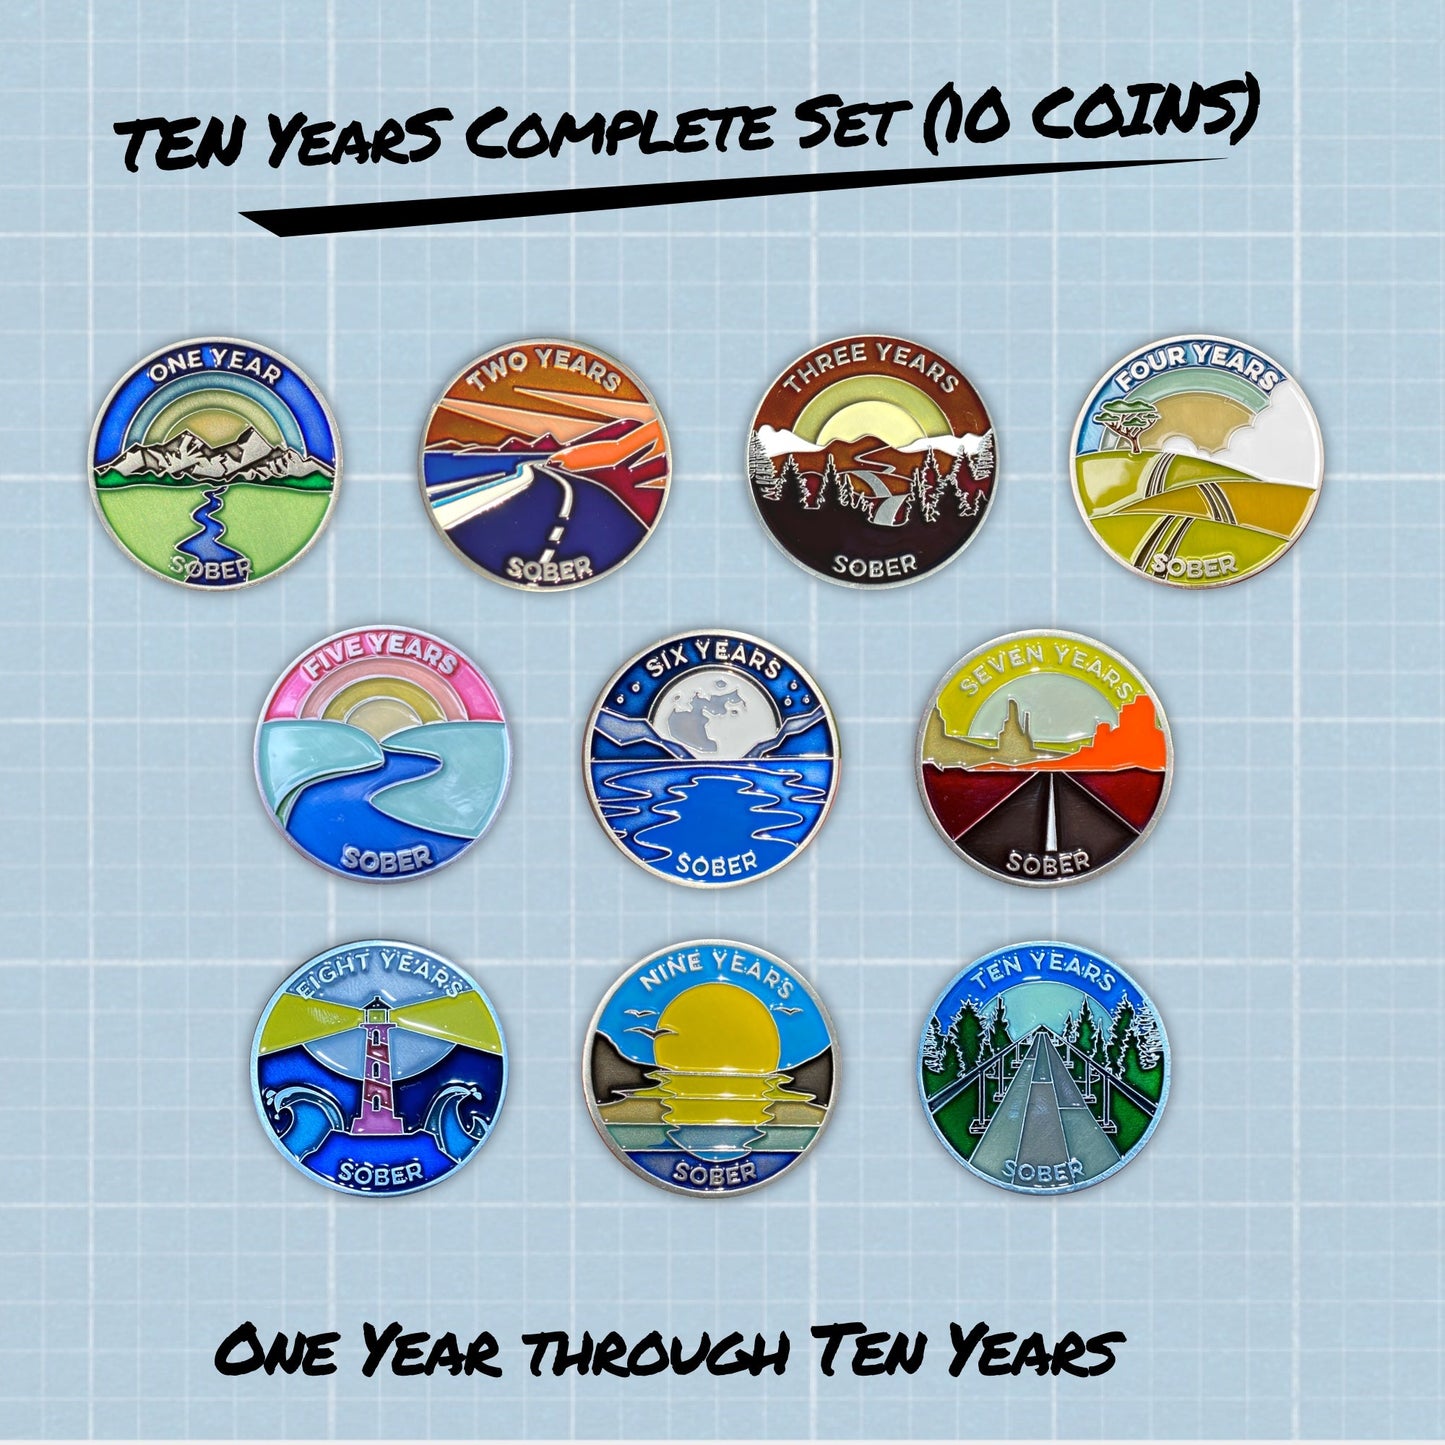 Ten Years Sober complete set: 10 coins total - The Achieve Mint